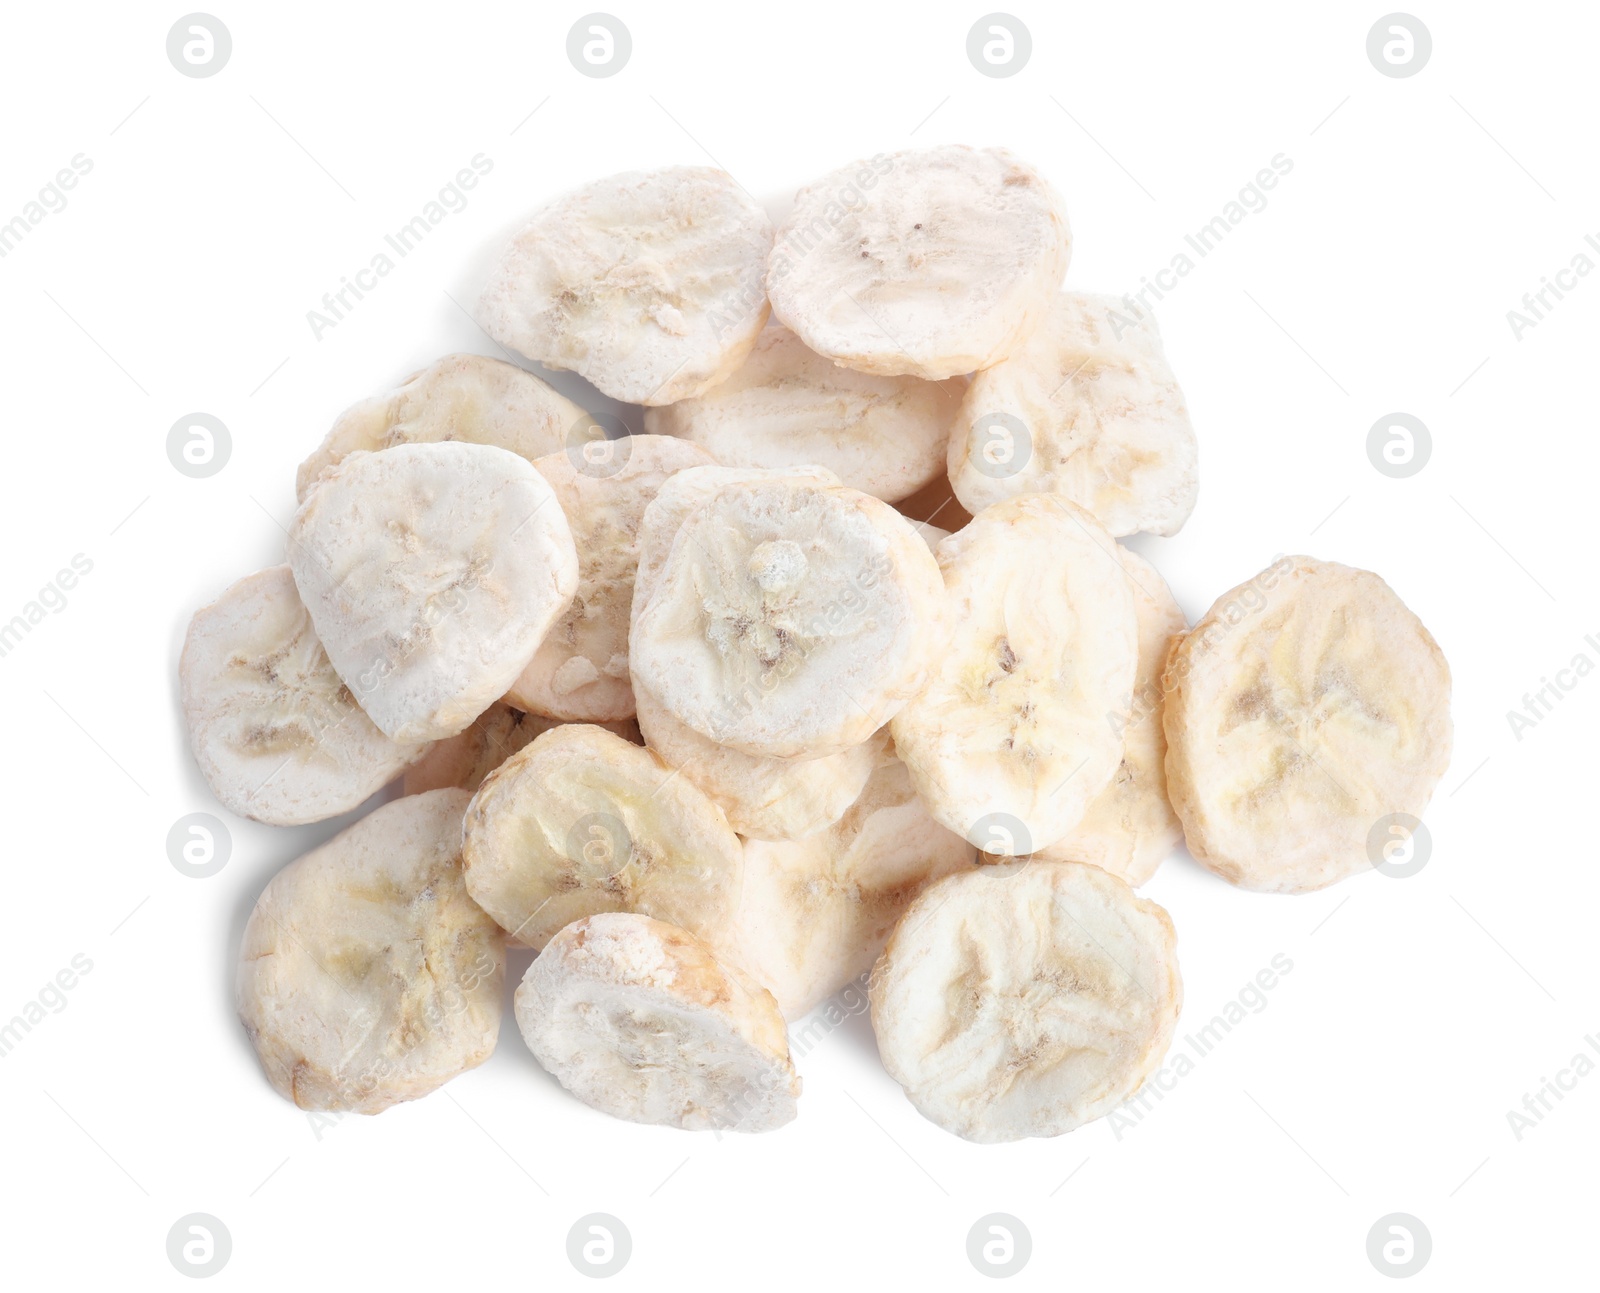 Photo of Pile of freeze dried bananas on white background, top view